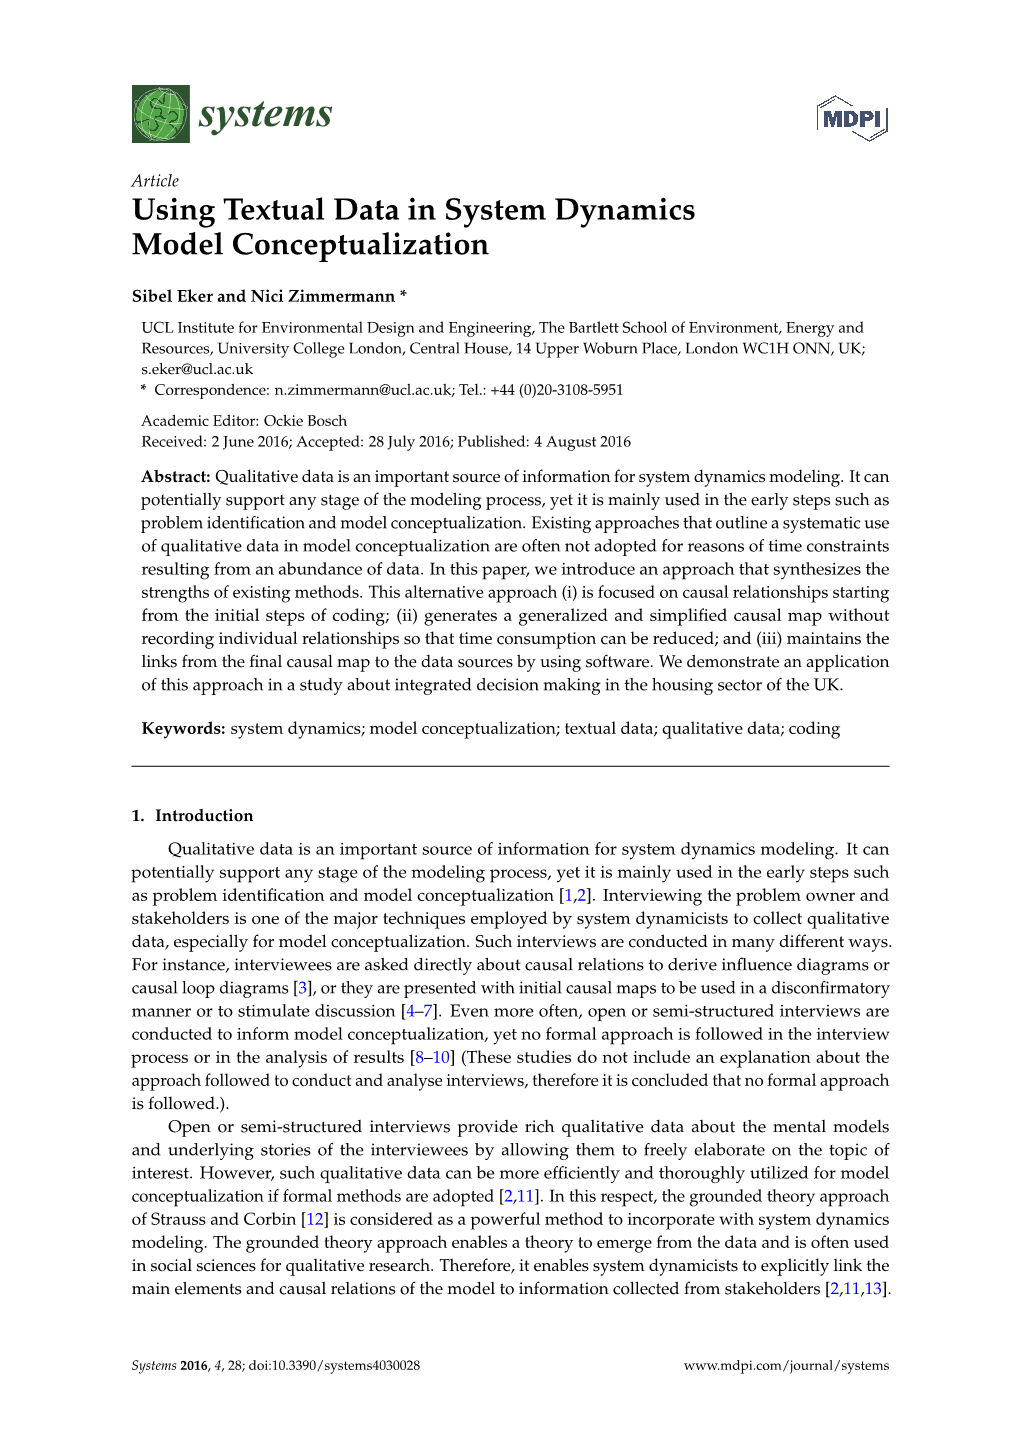 Using Textual Data in System Dynamics Model Conceptualization